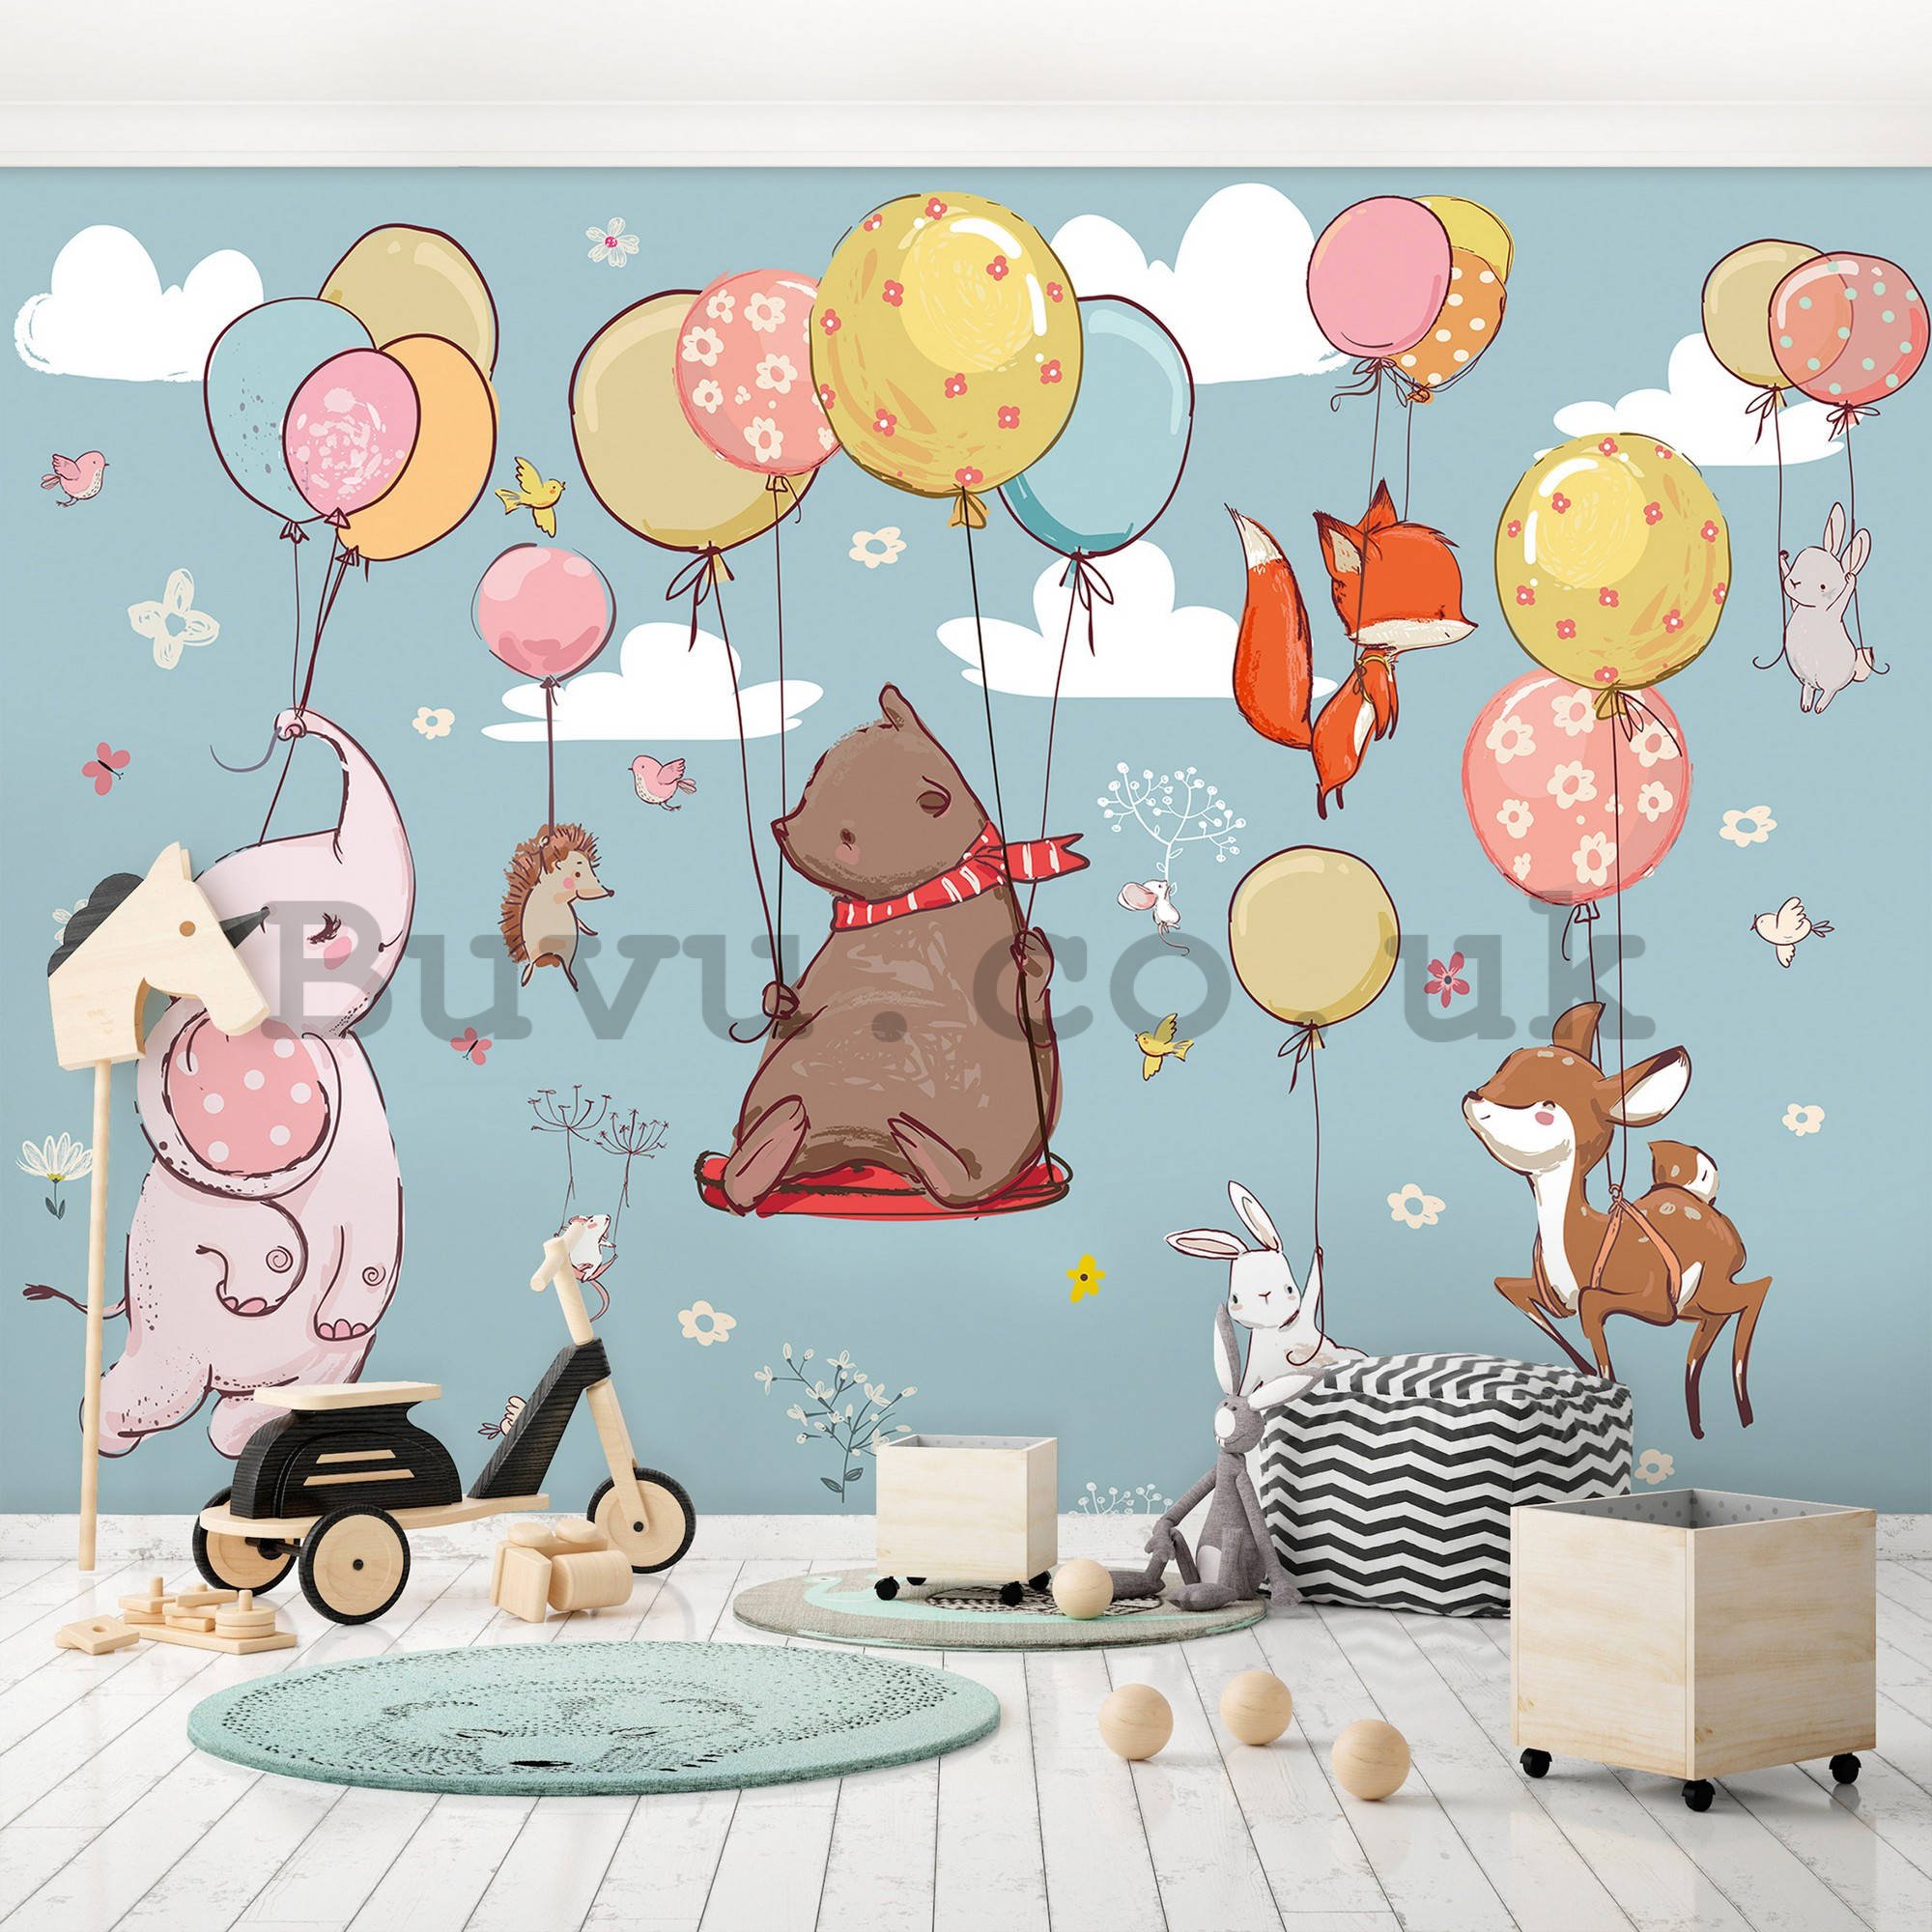 Wall mural vlies: Animals in the clouds - 368x254 cm